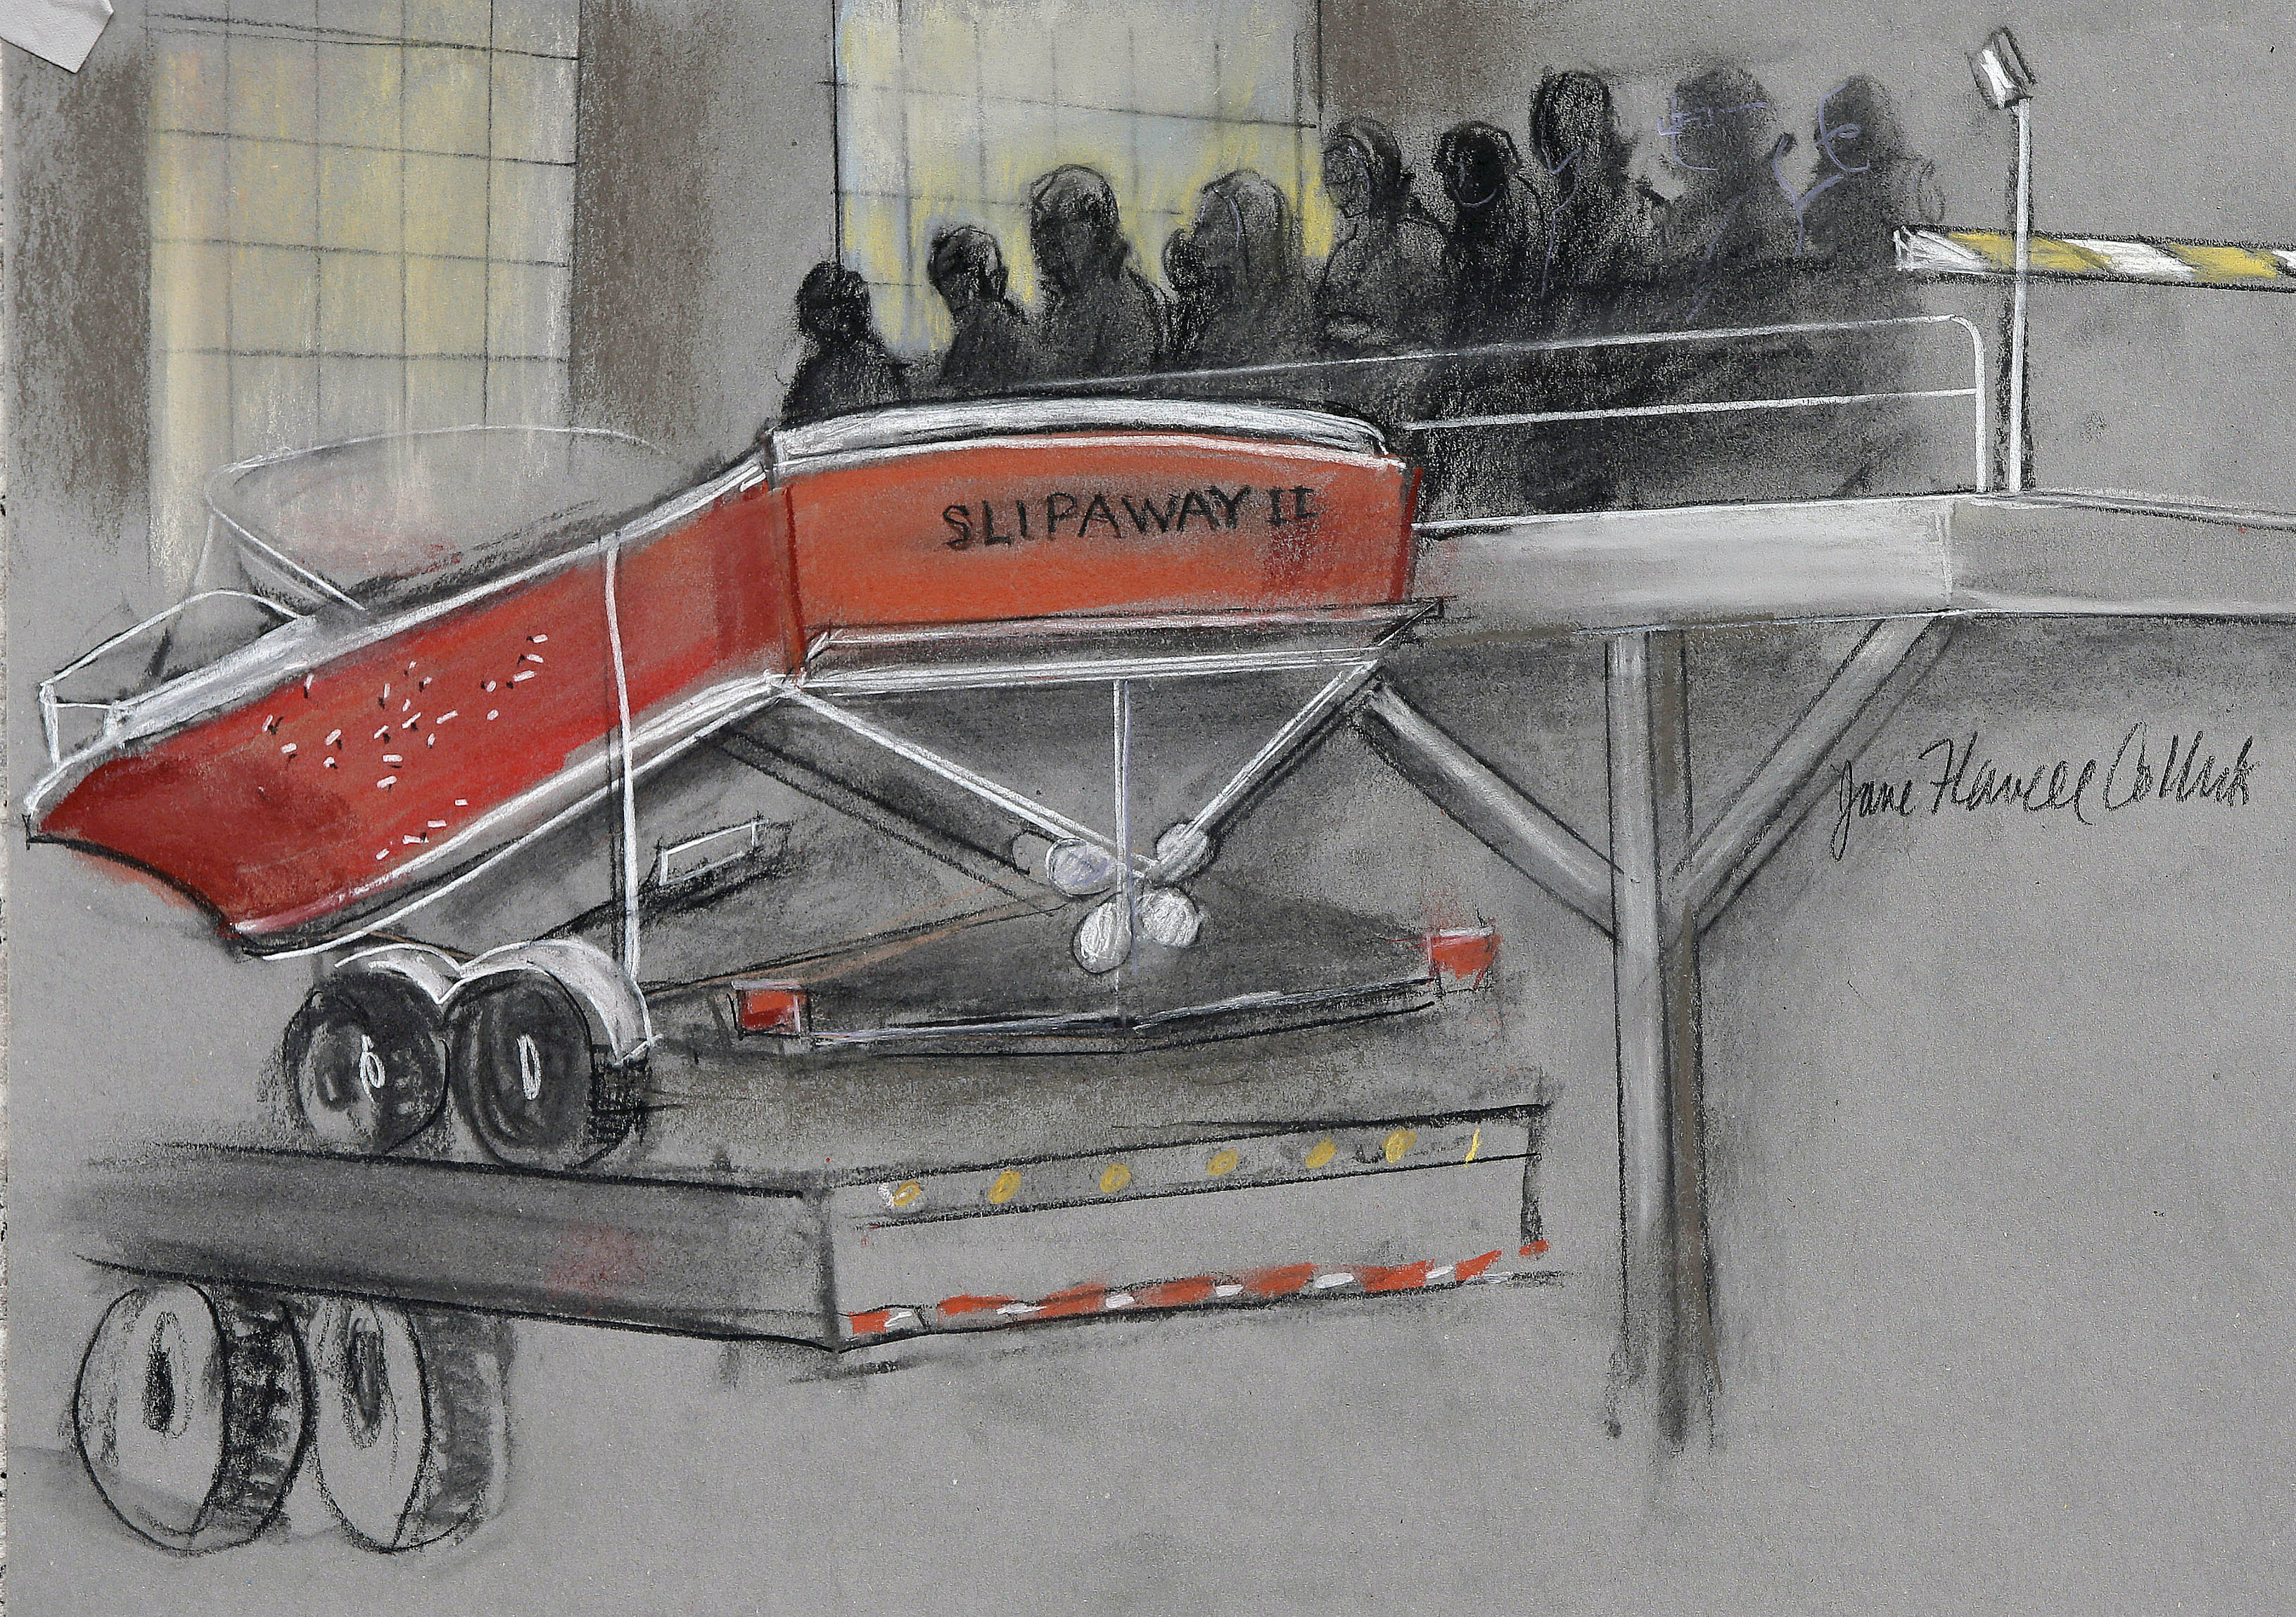 In this courtroom sketch, the boat in which Dzhokhar Tsarnaev was captured is depicted on a trailer for observation during Tsarnaev's federal death penalty trial on March 16, 2015, in Boston. (Jane Flavell Collins—AP)